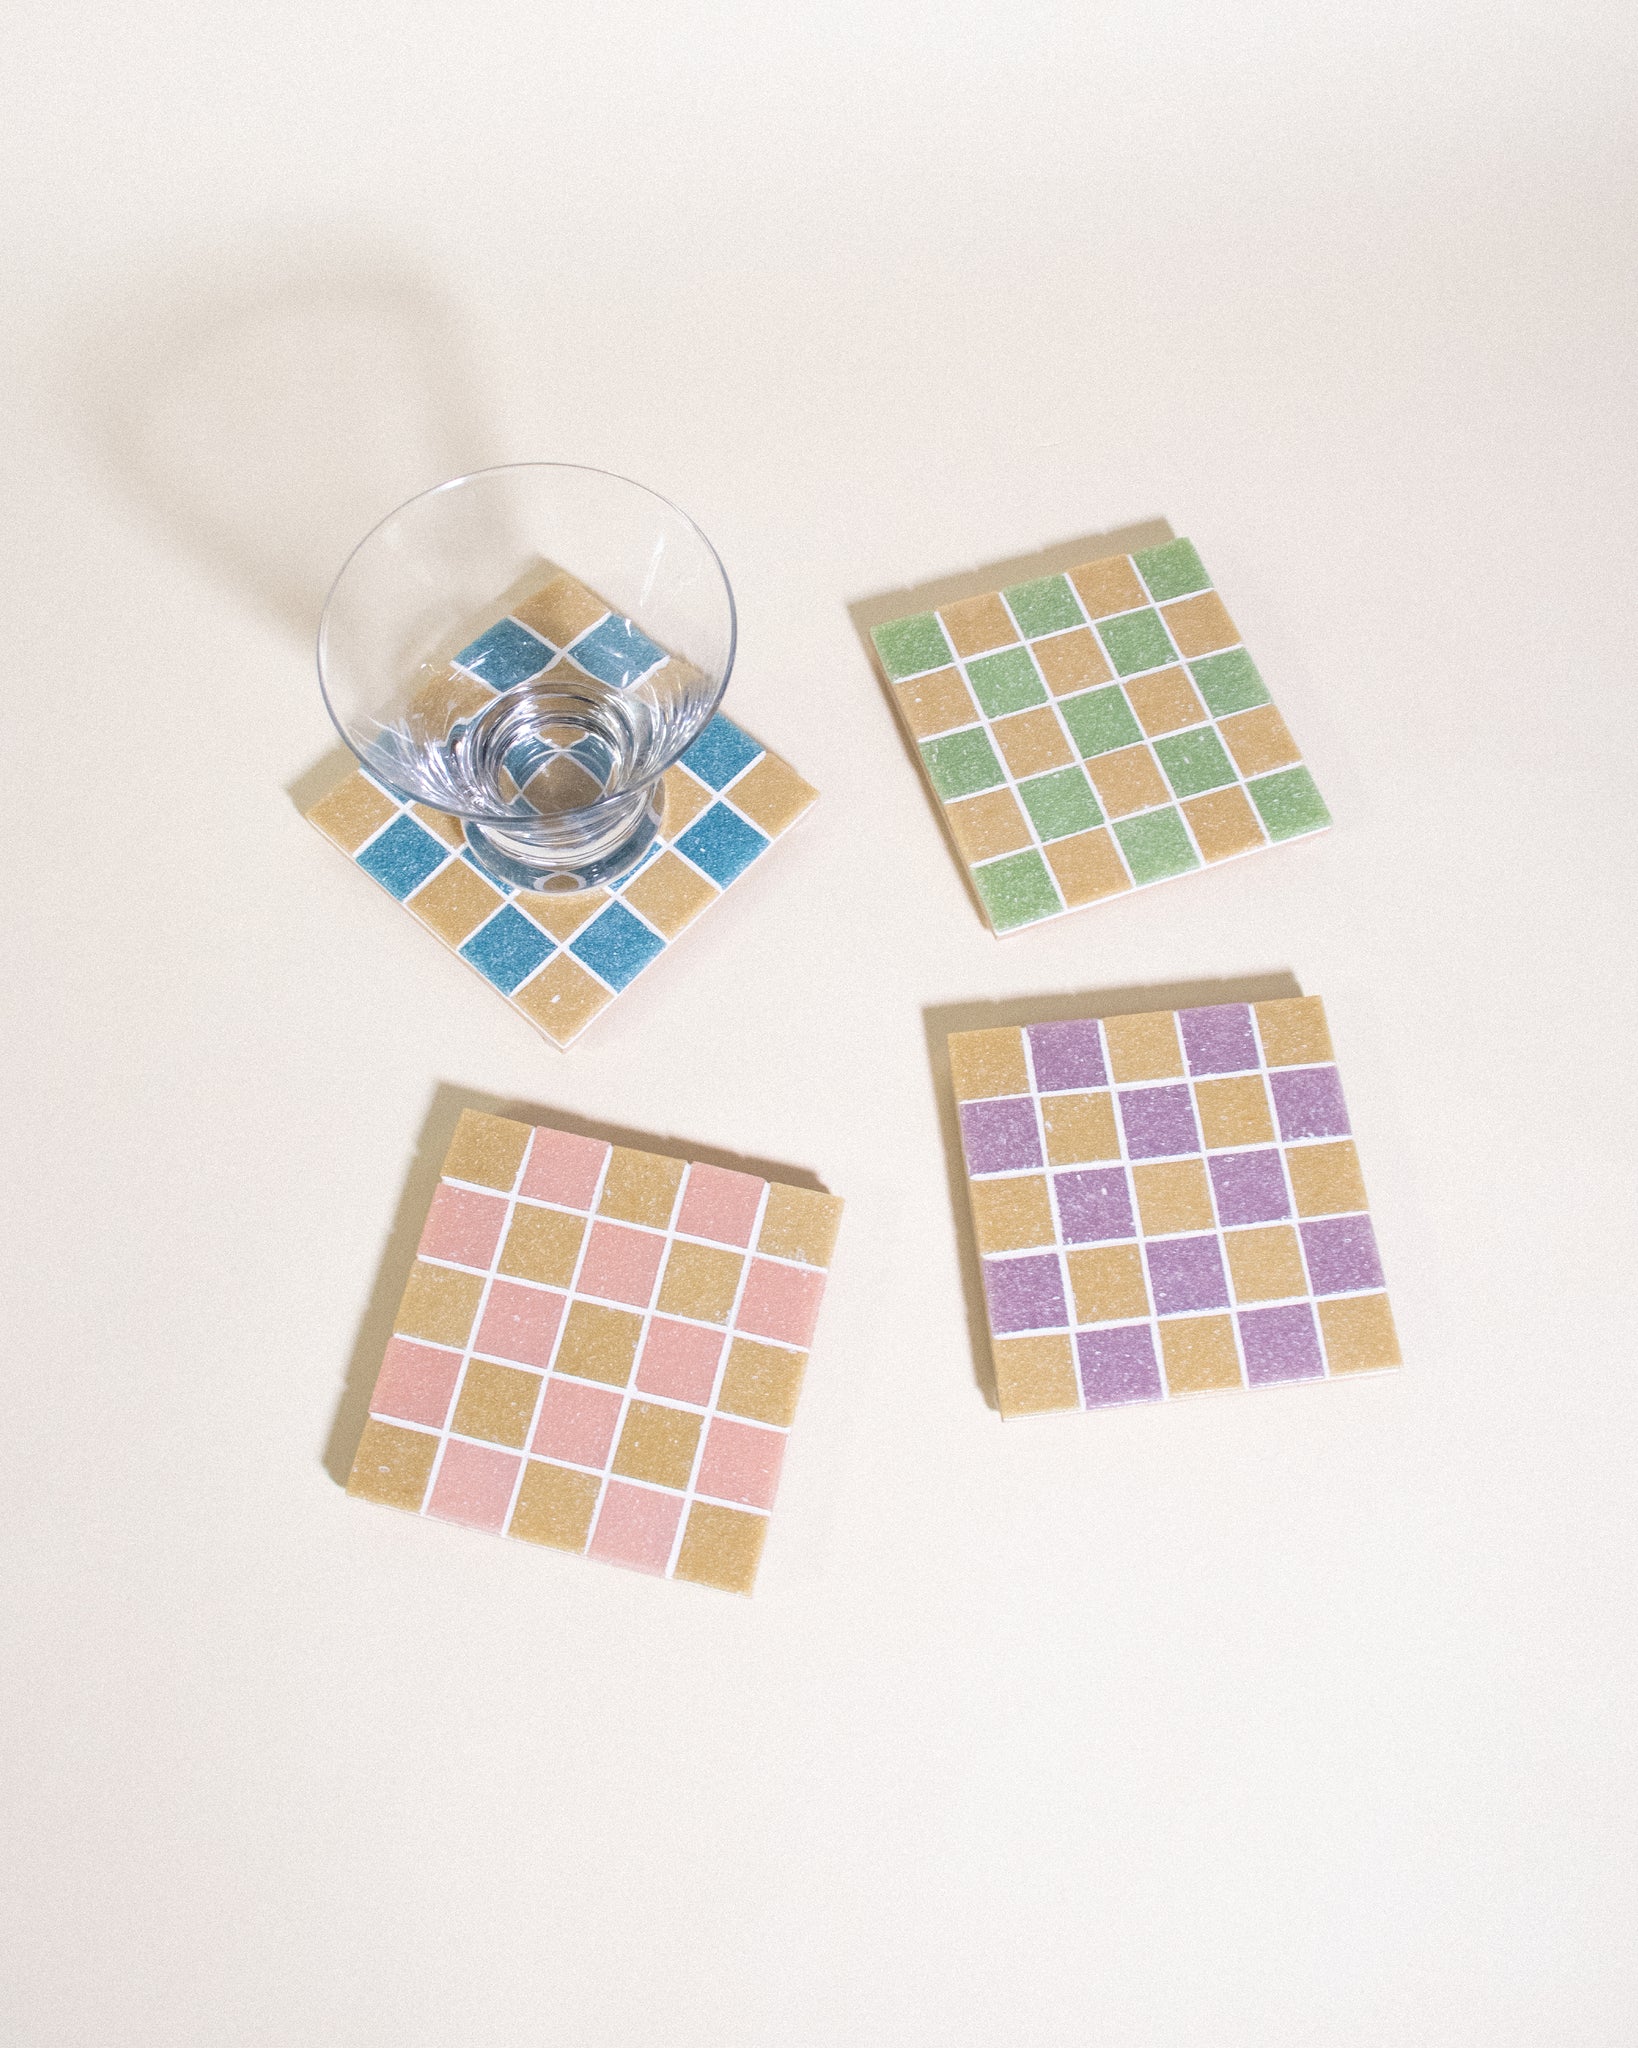 GLASS TILE COASTER - Sour Patch Candy - 14